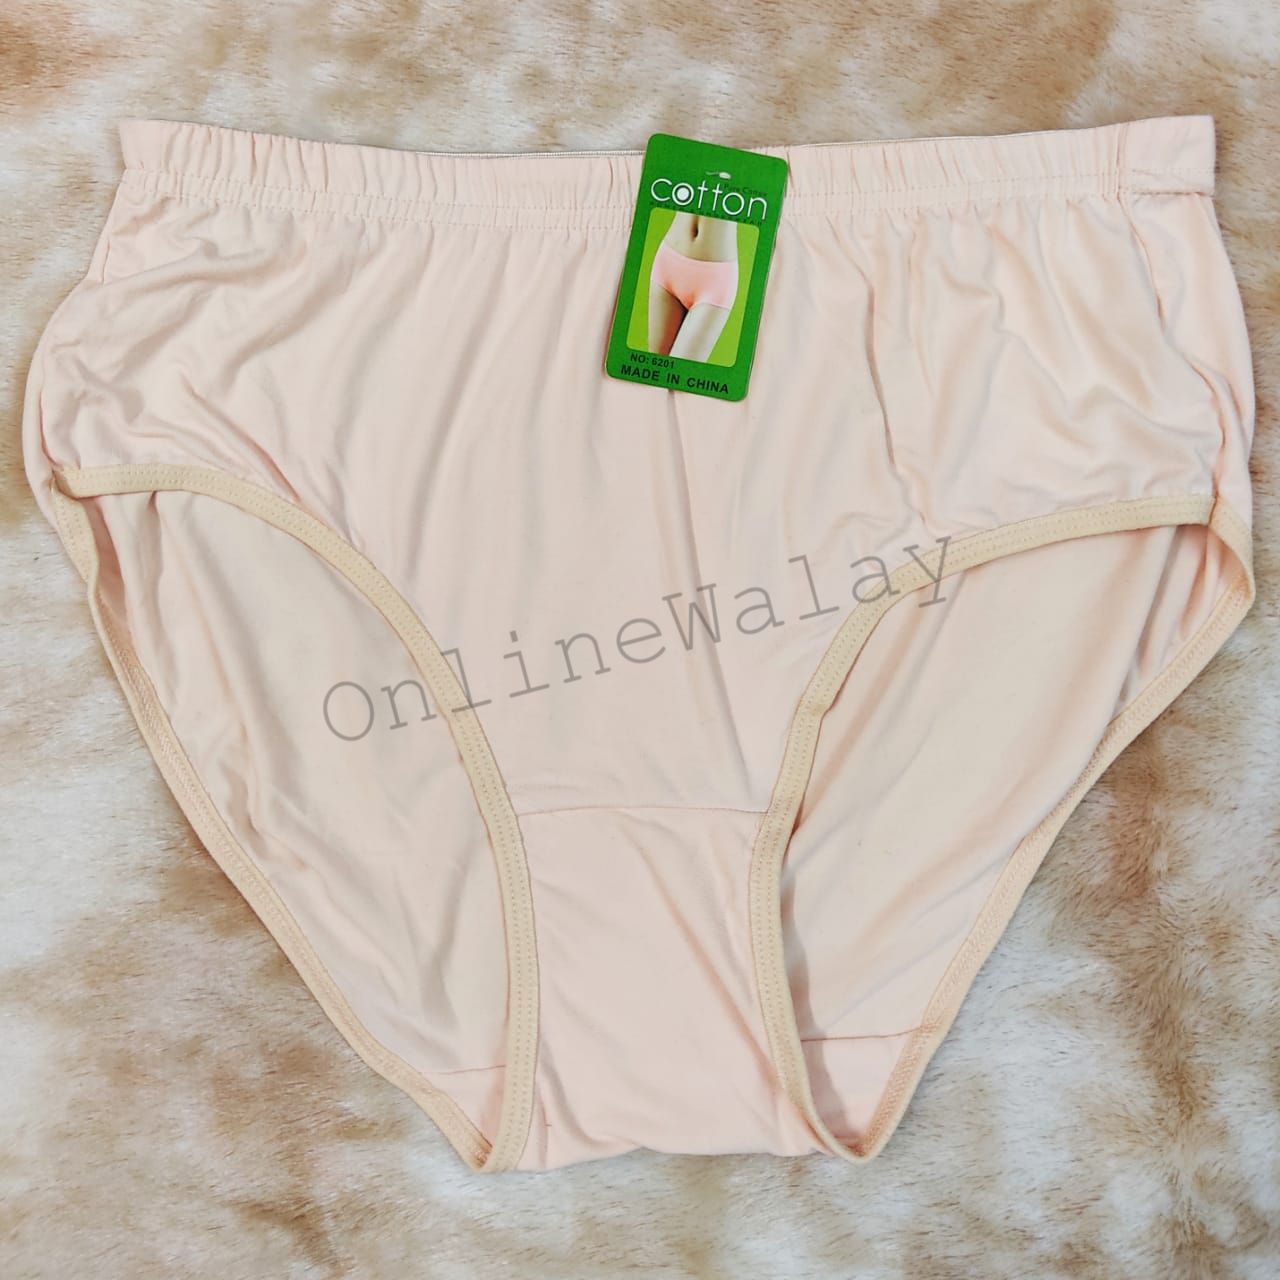 Imported Soft Jersey Underwear For Women Stretchable Panties For Girls